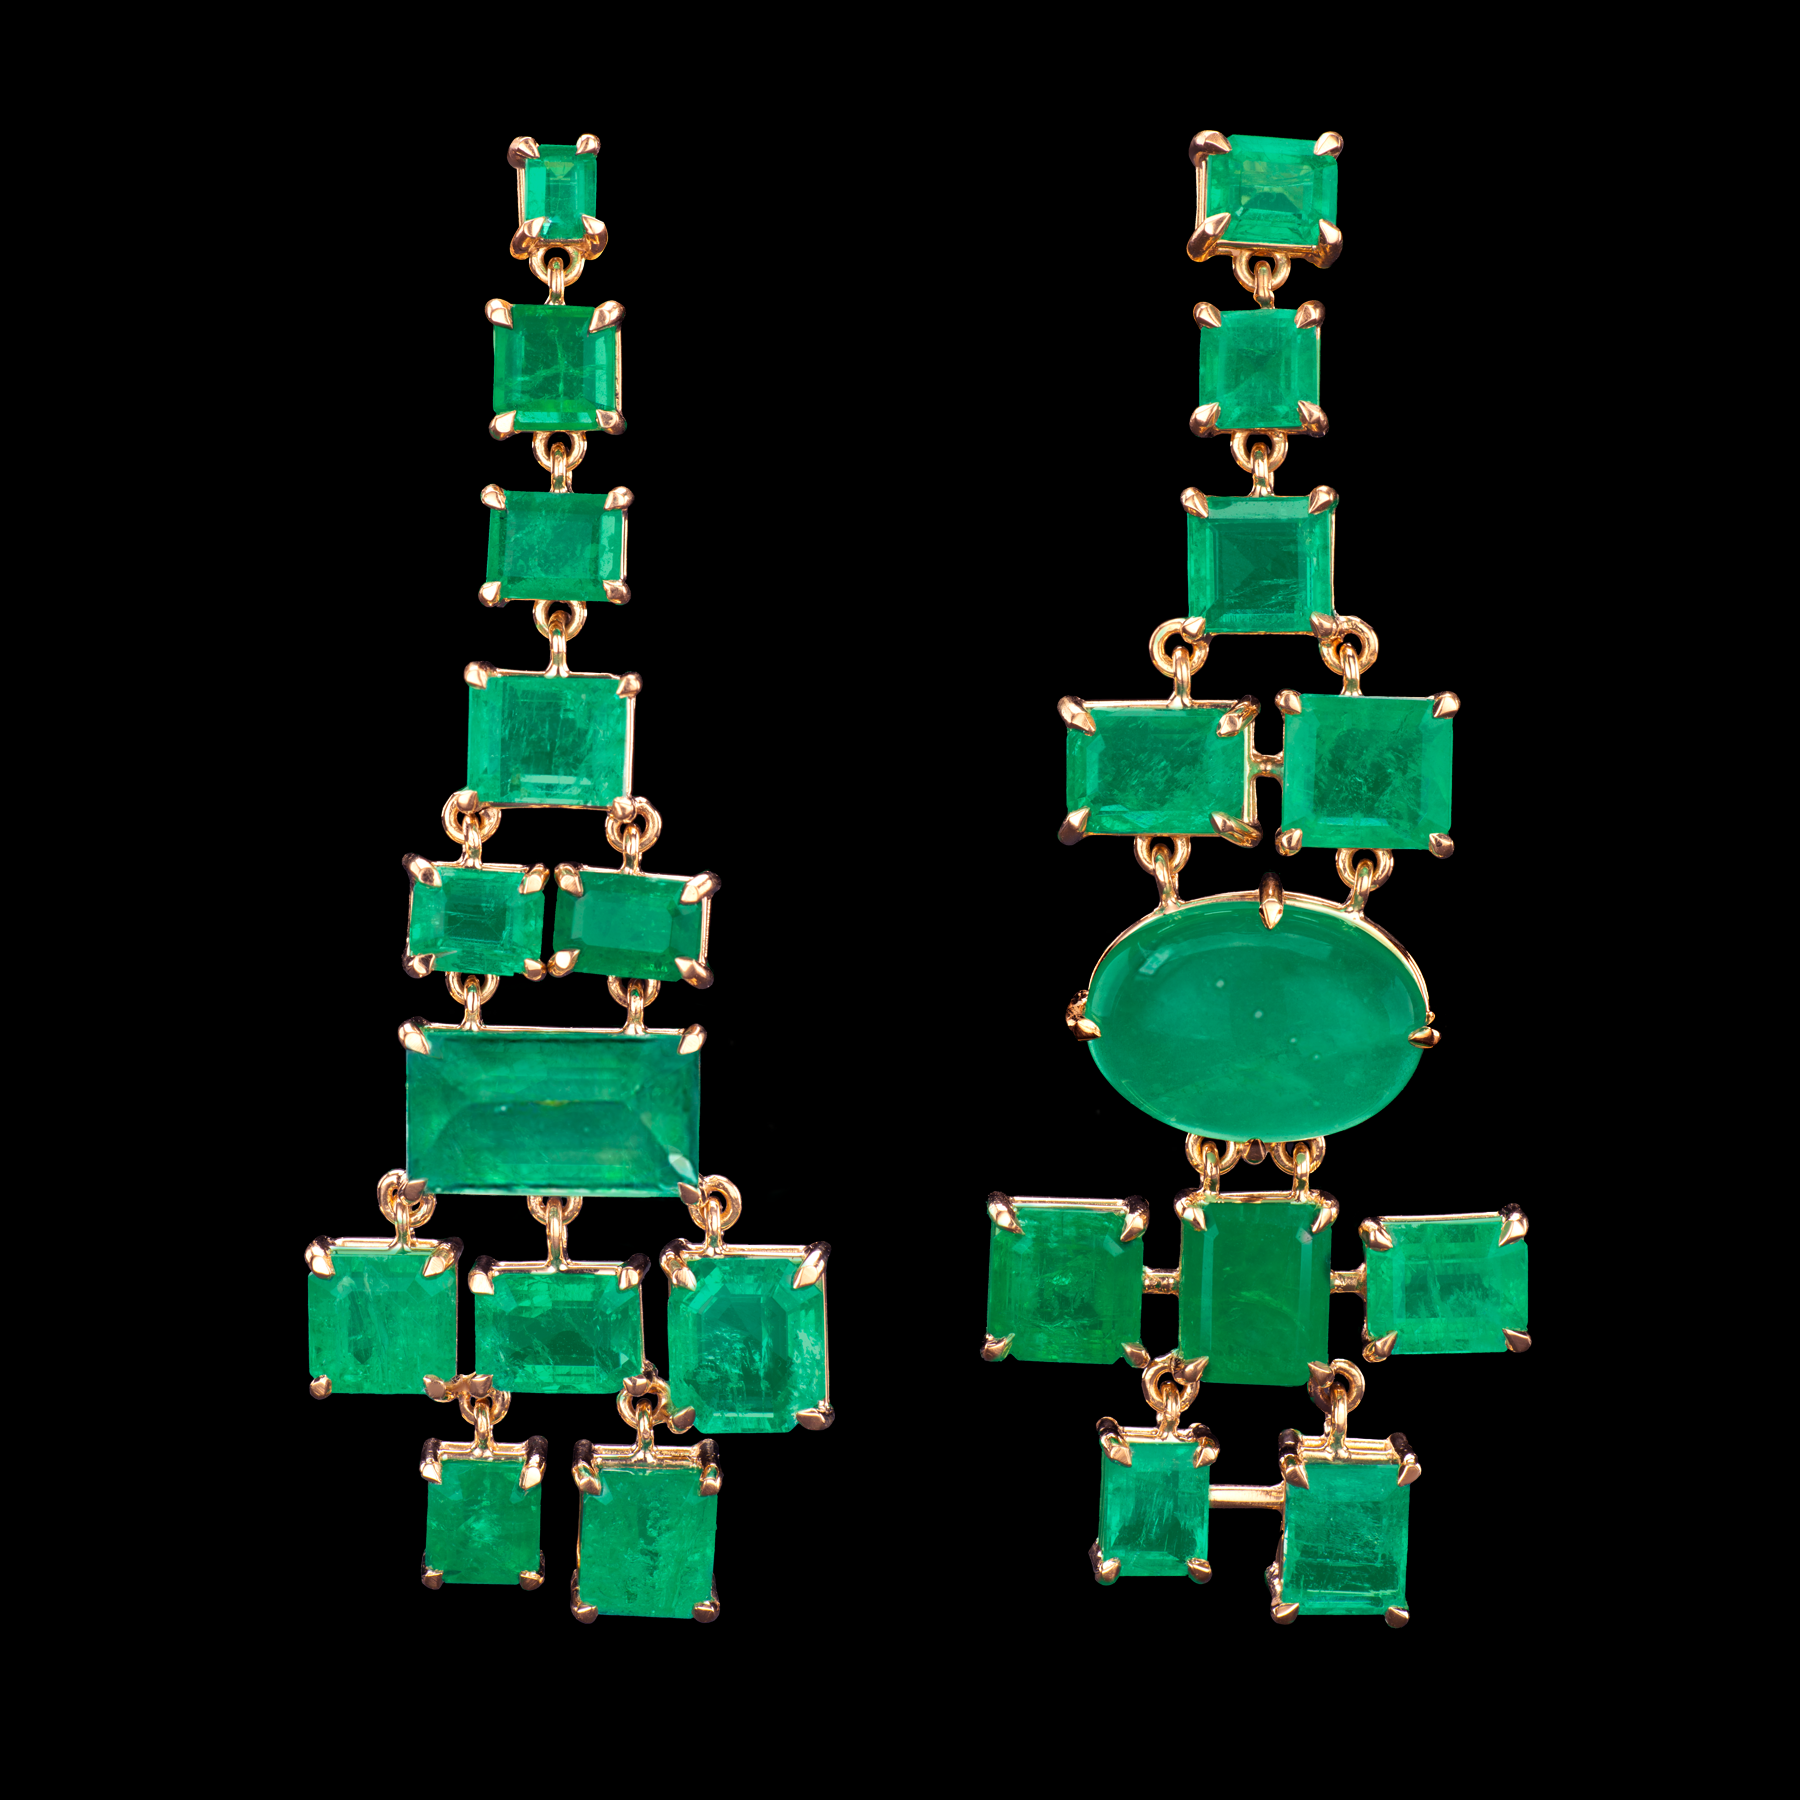 The Misfits Earrings by designer Solange Azagury-Partridge - YG and Emeralds - front view